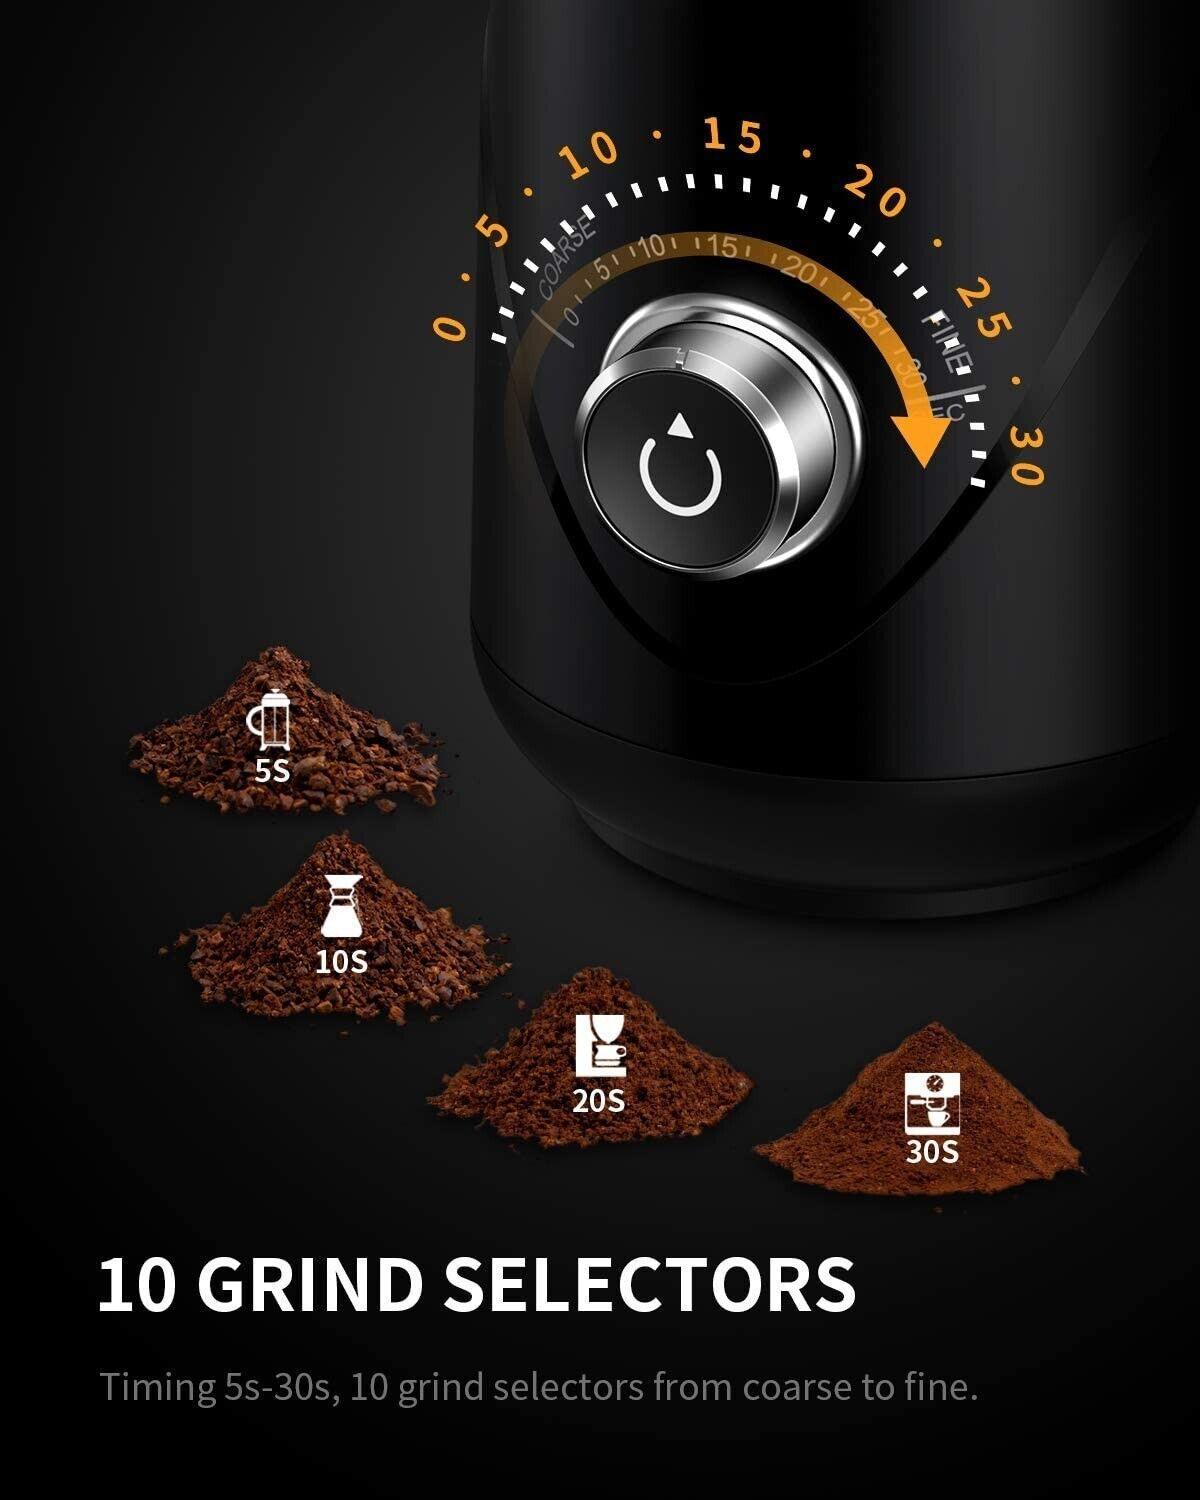 SHARDOR Coffee Grinder Electric with Adjustable Precision Setting - Massive Discounts